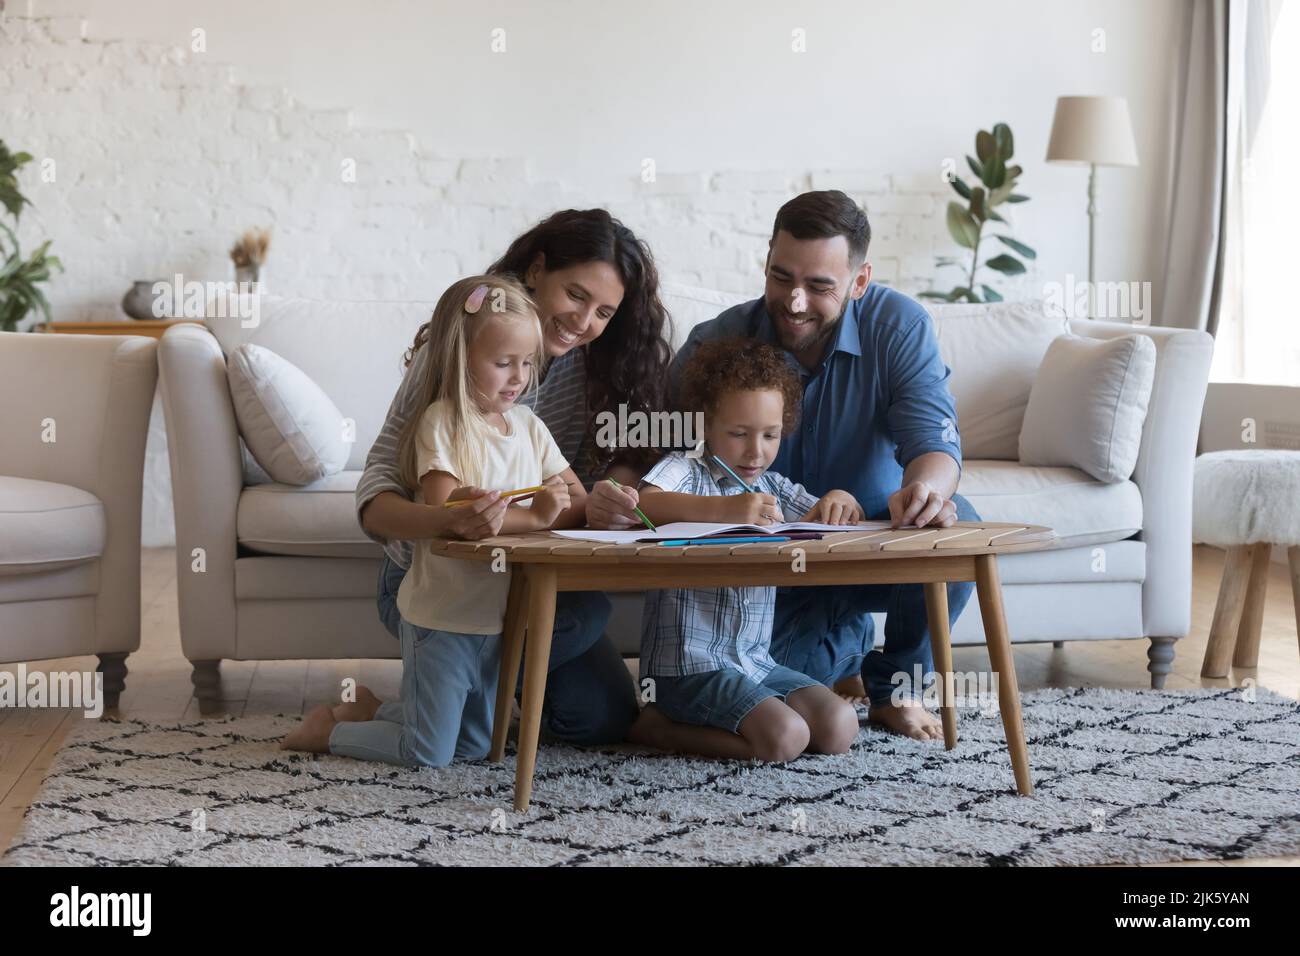 Mother and father helping children to draw in colored pencils Stock Photo